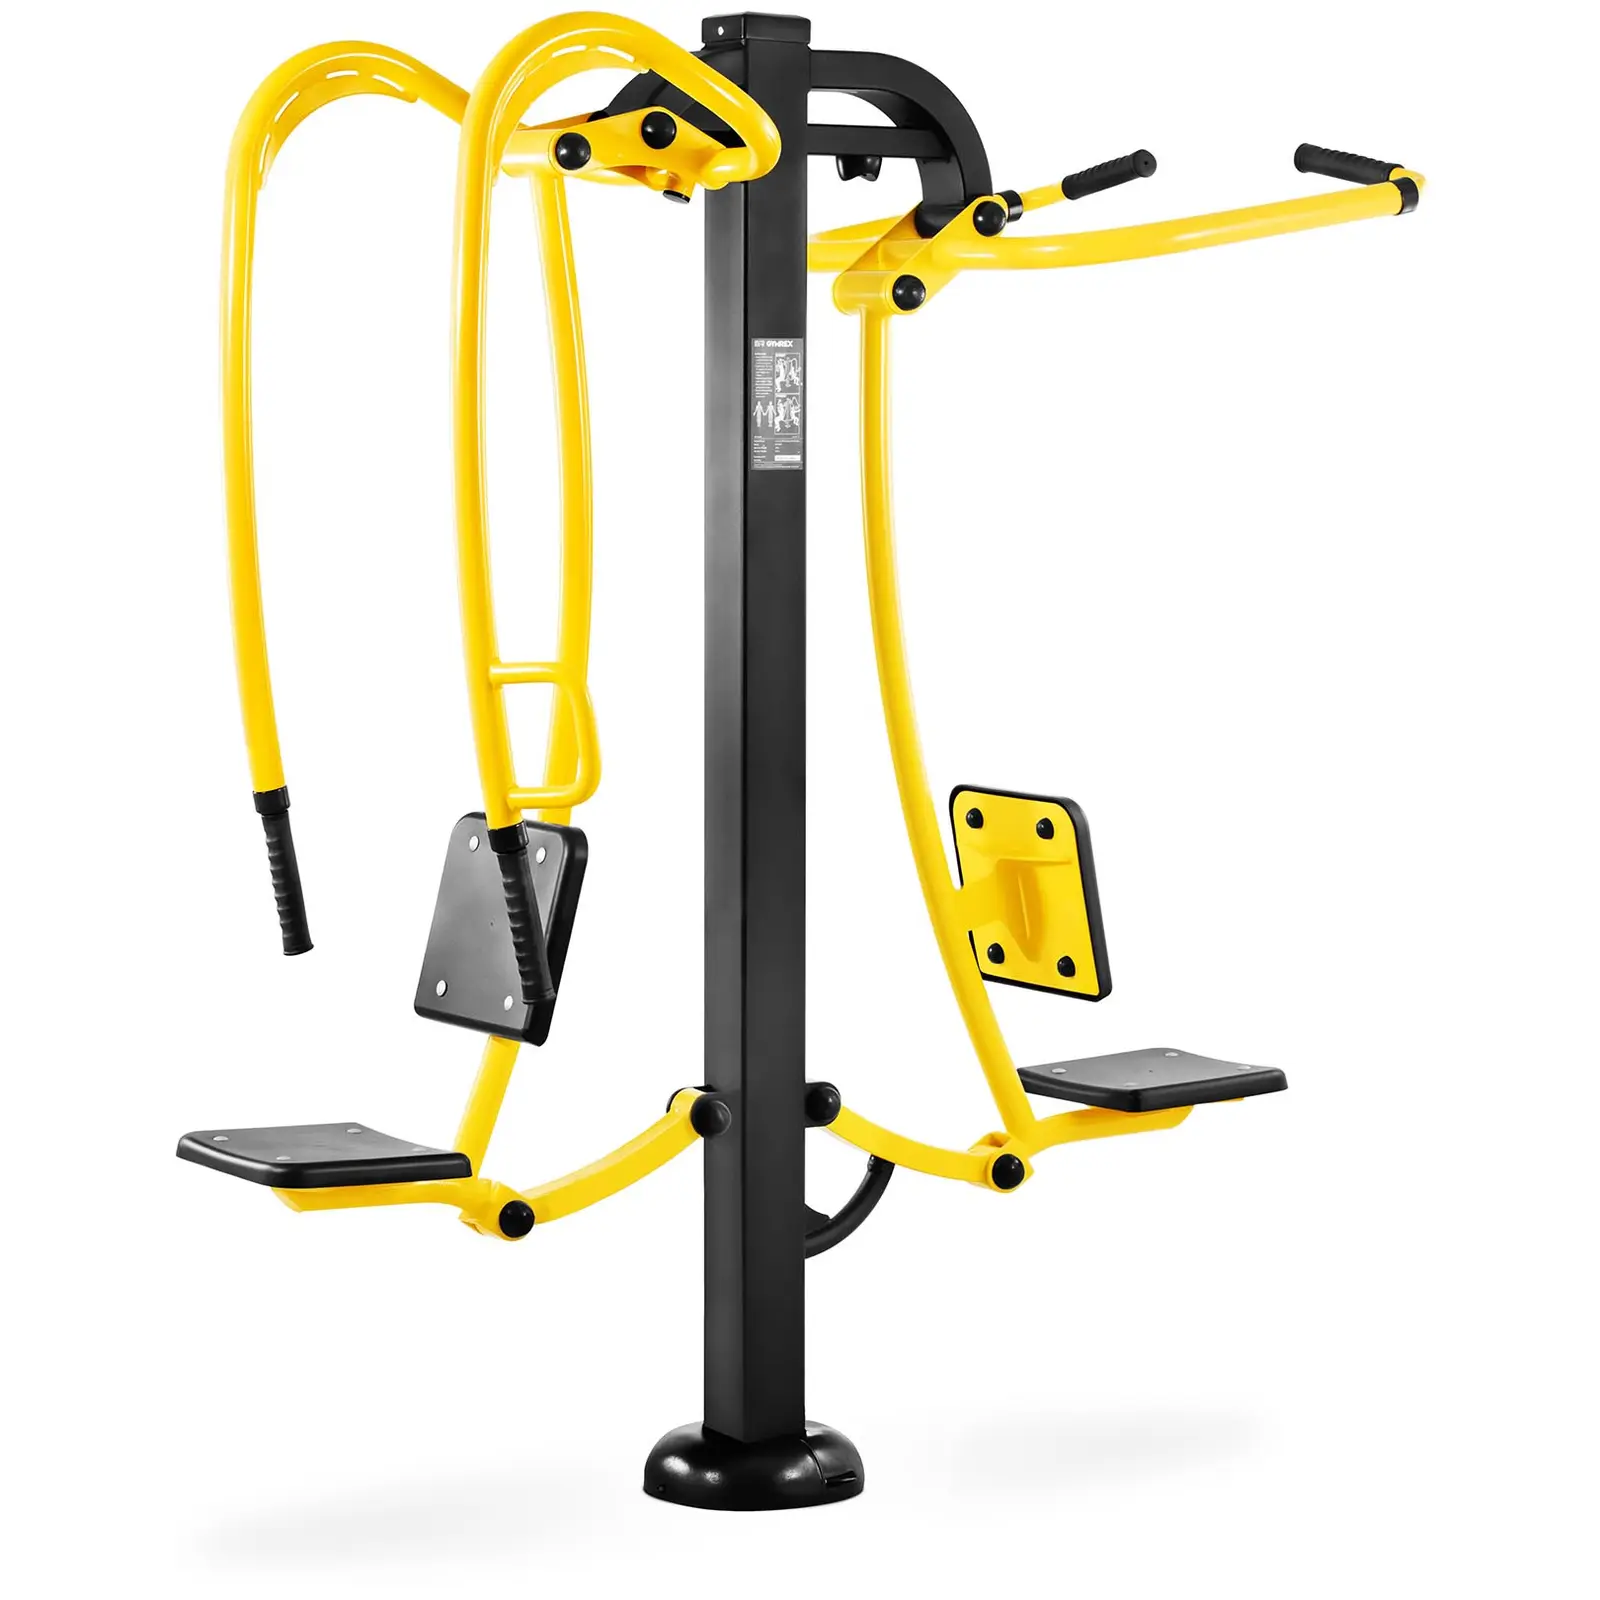 Multi-gym - up to 130 kg - steel